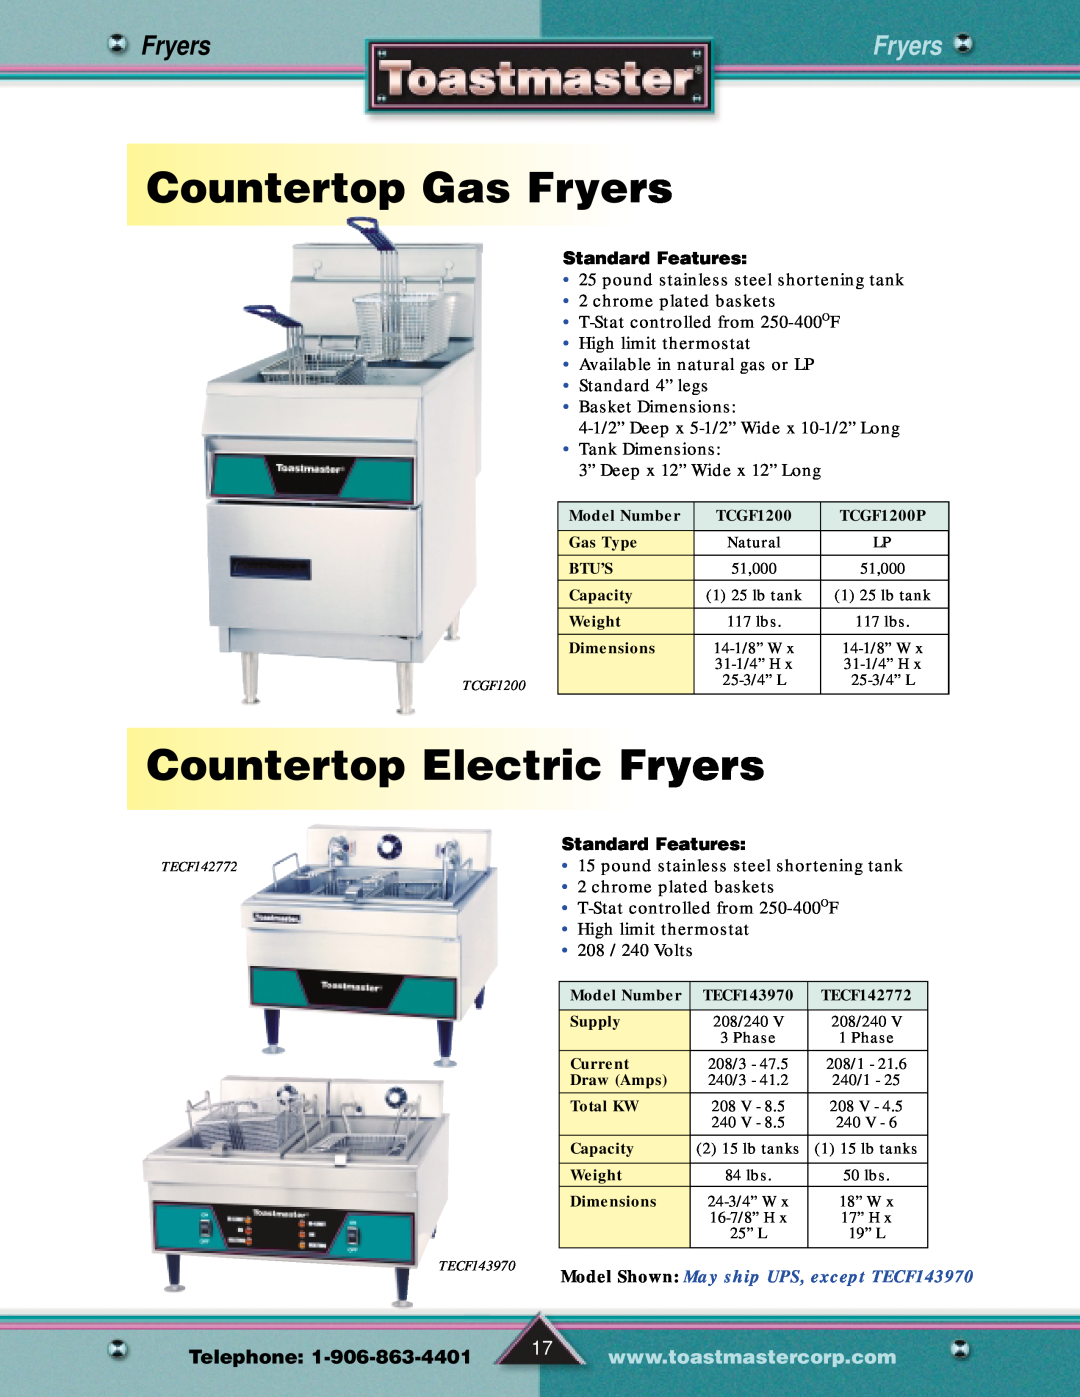 Toastmaster Gas & Electric Fryer manual CountertopGasFryers, CountertopElectricFryers, Standard Features, Telephone 